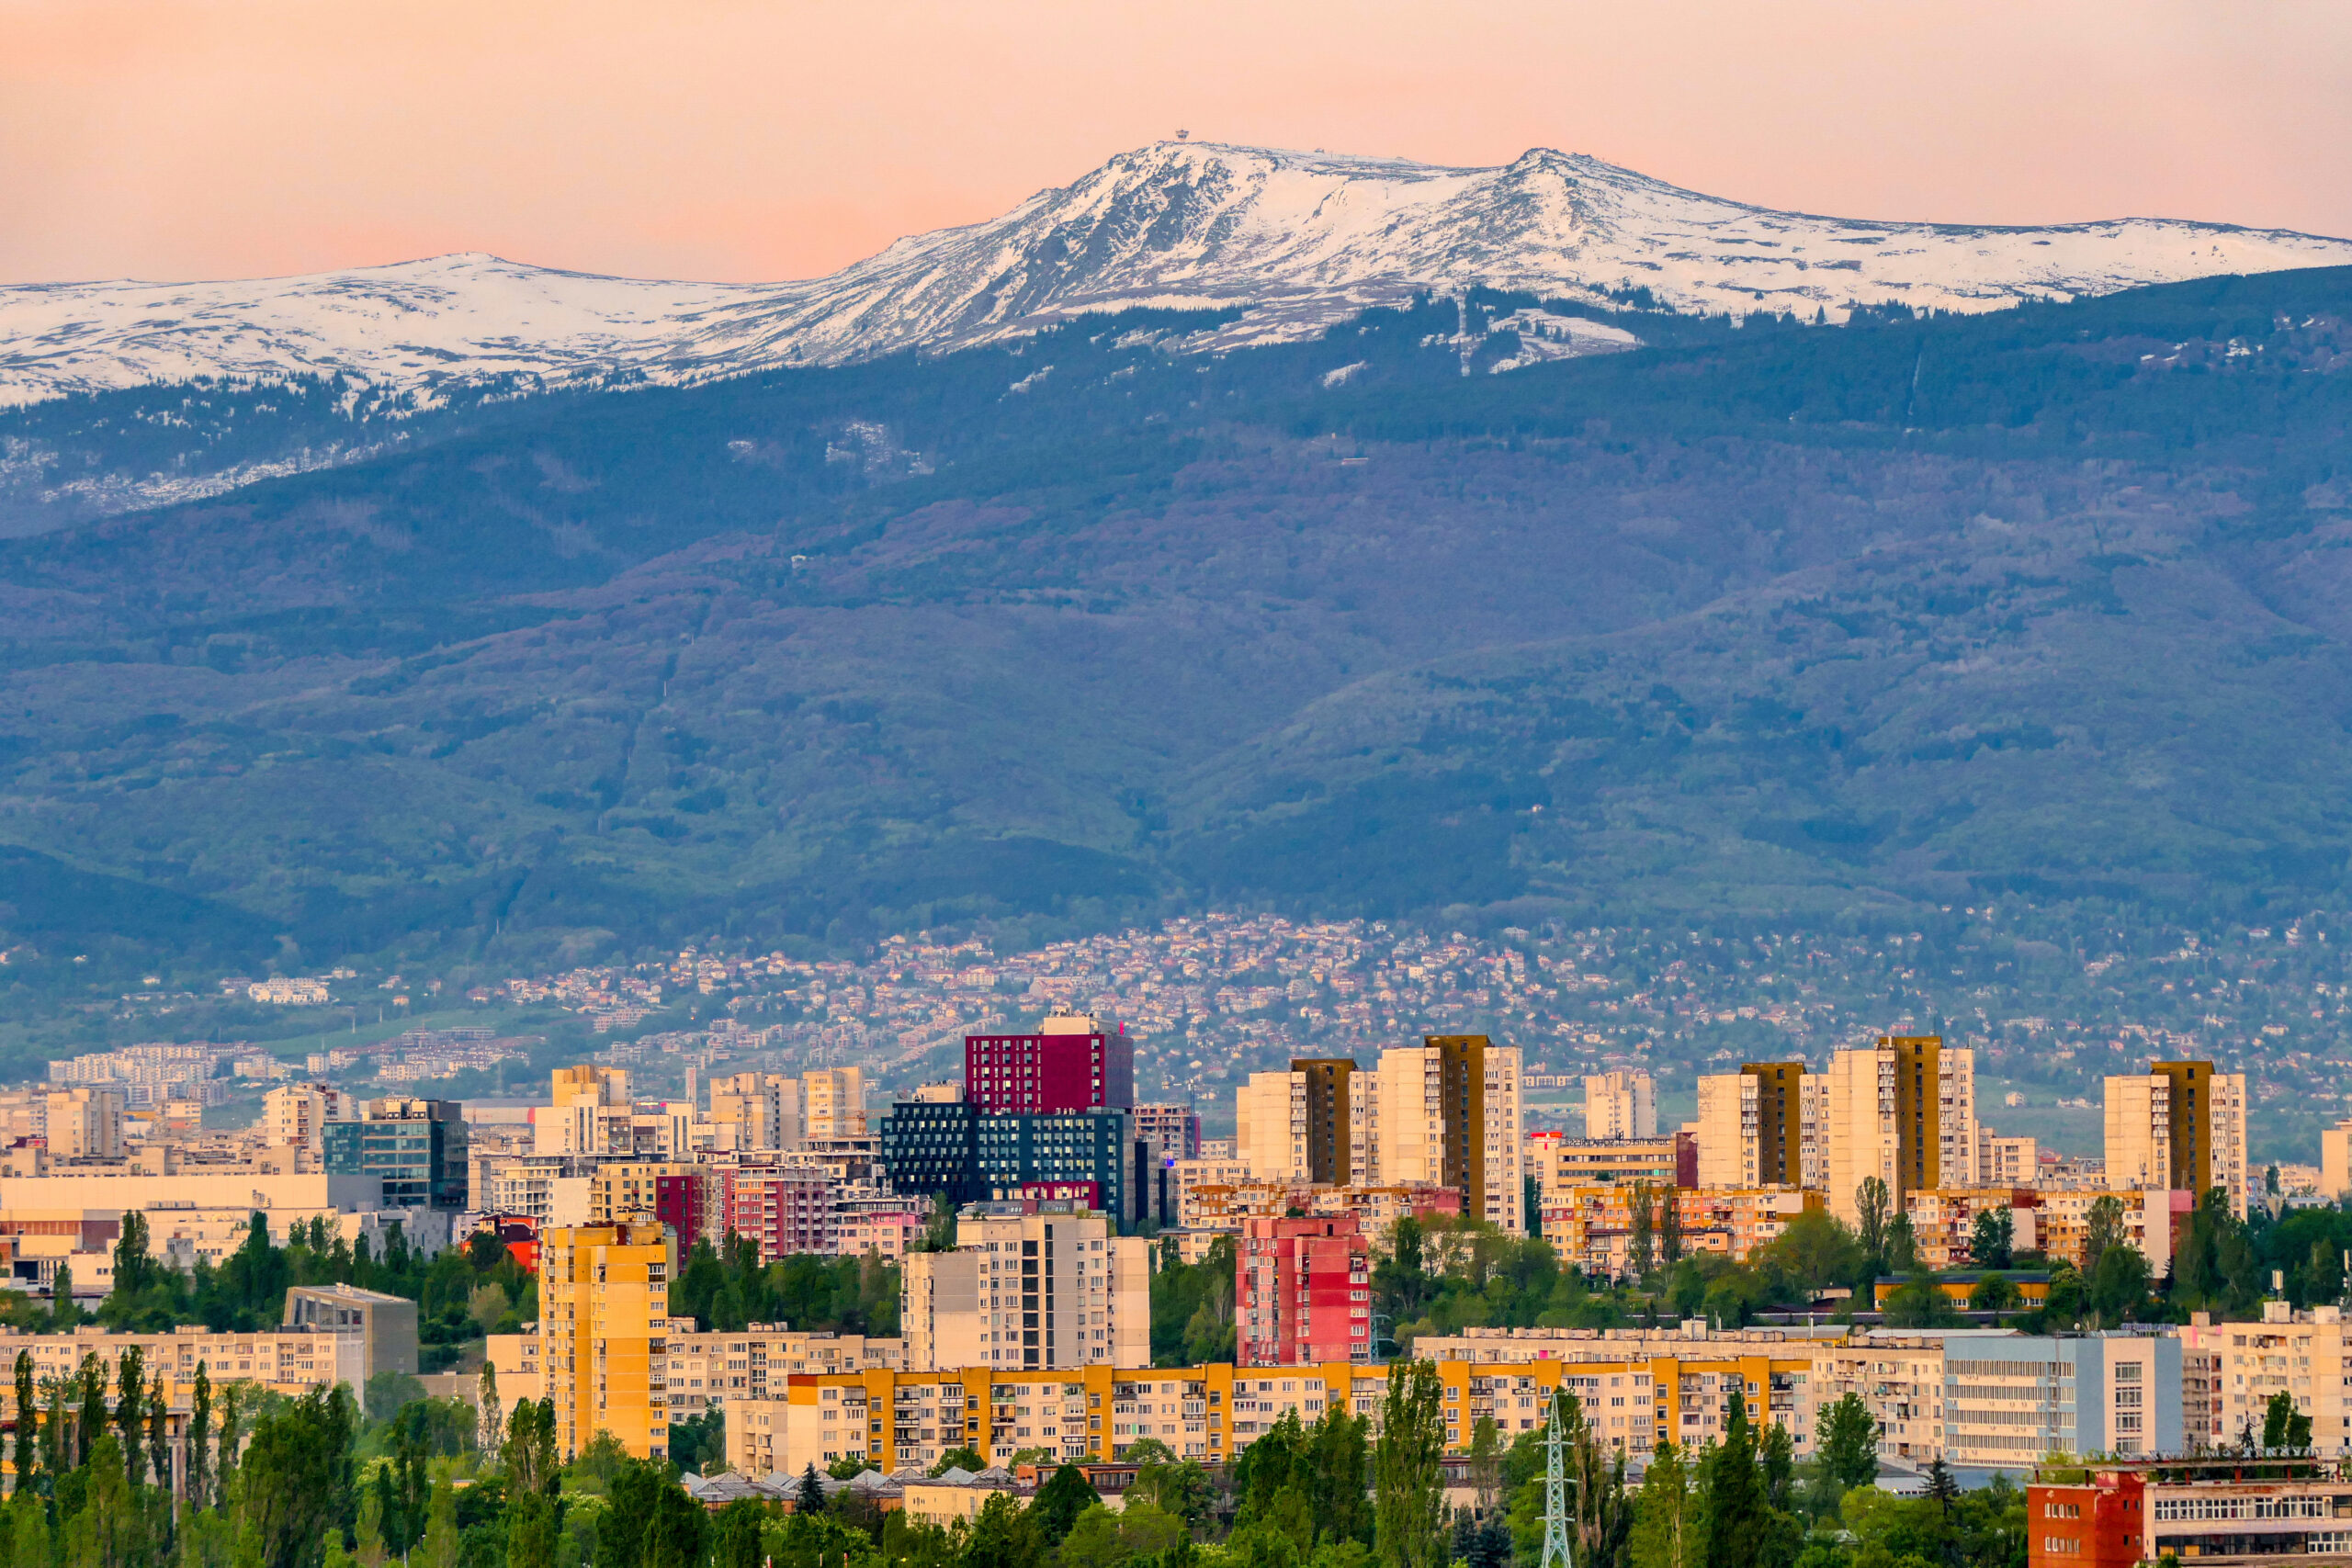 City skyline with snow covered mountain in the backdrop.